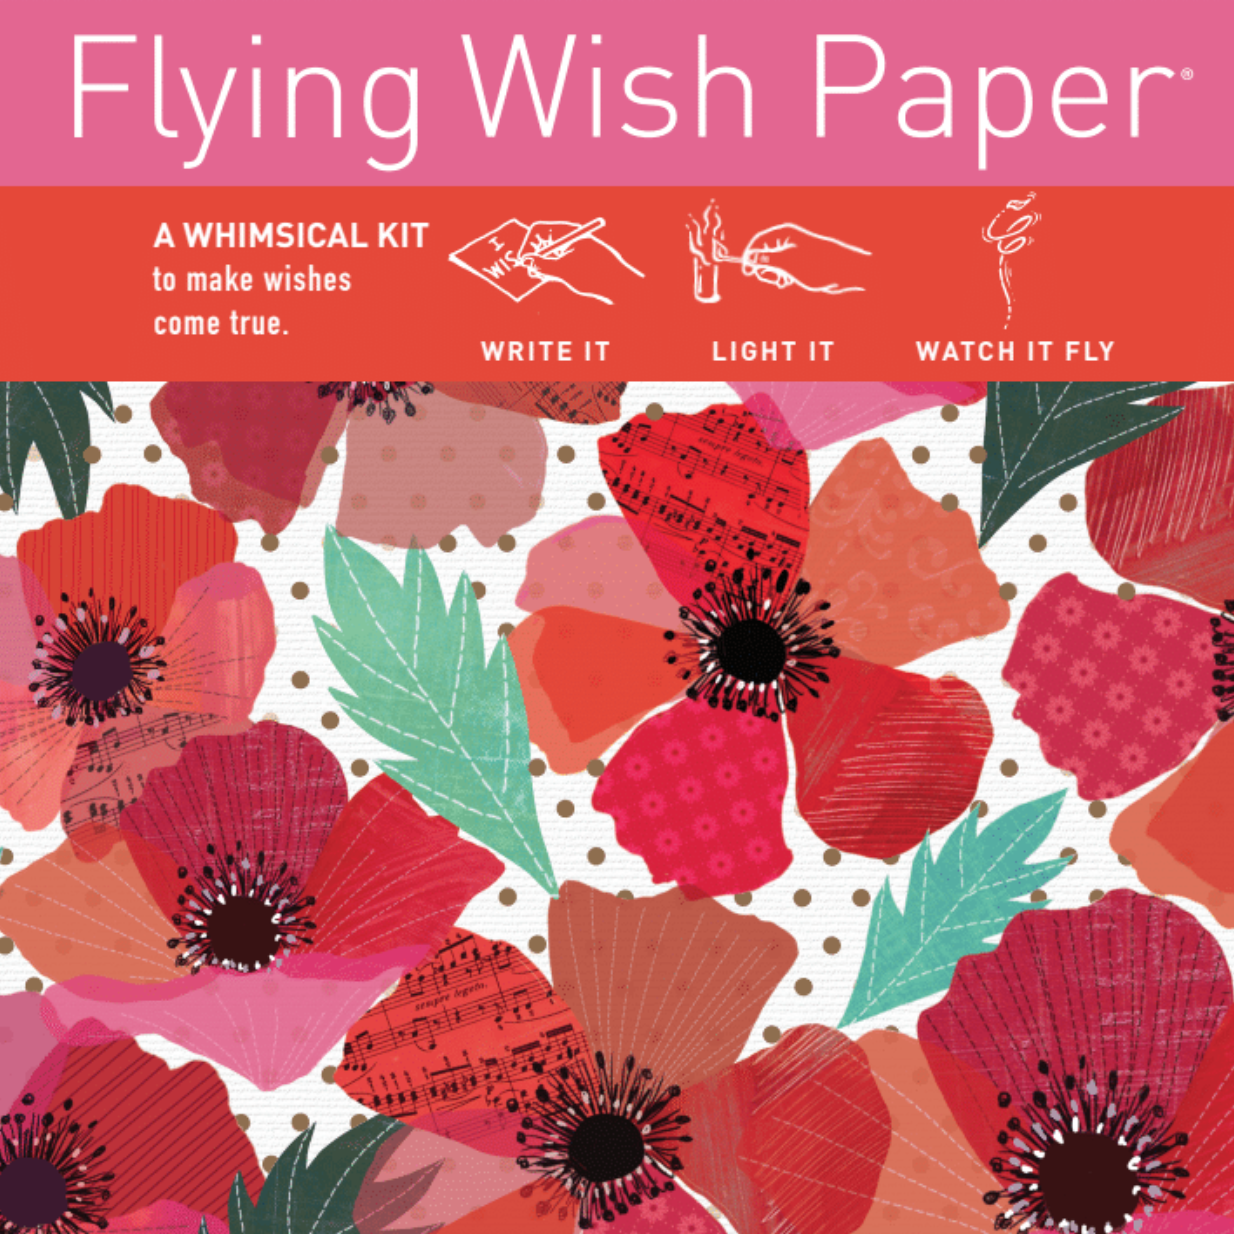 Flying Wish Paper - Poppies - FWP-M-703 - The Open Mind Store